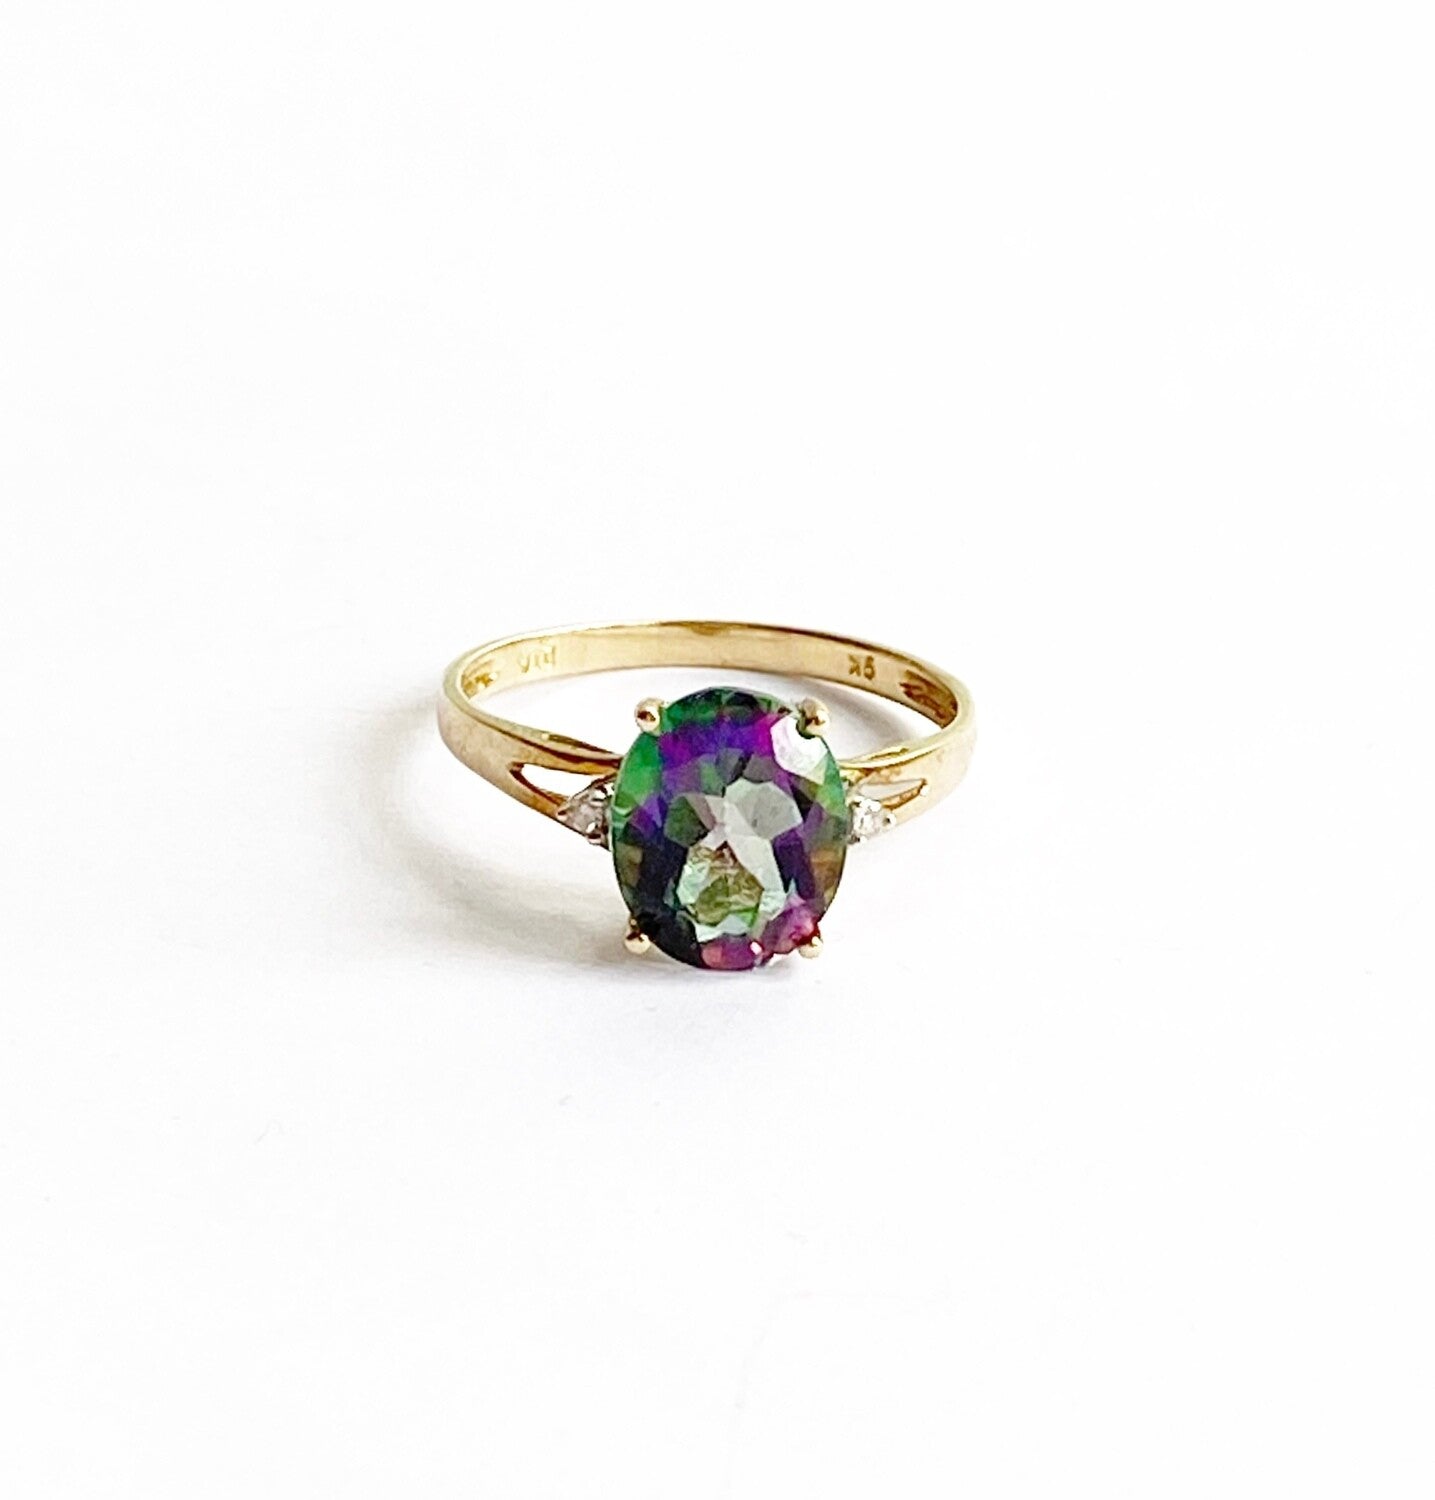 9ct 375 pre owned mystic topaz and diamond ring size p 1/2